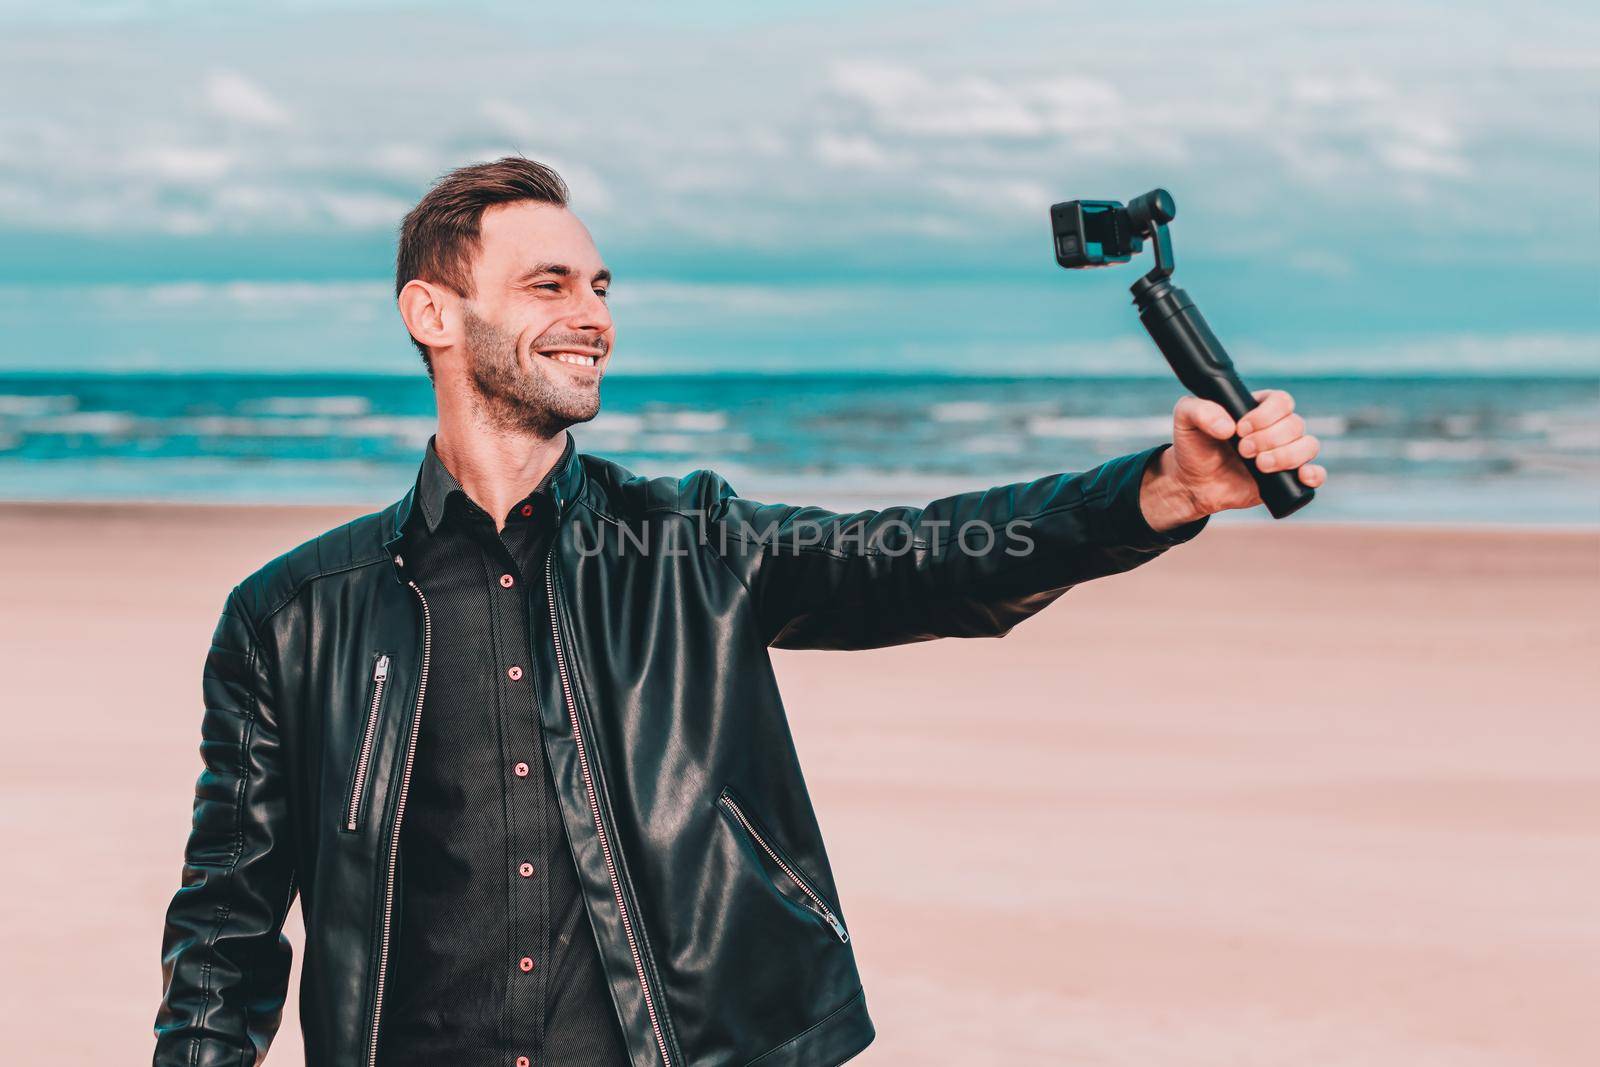 Smiling Young Blogger Making Selfie or Streaming Video at the Beach Using Action Camera with Gimbal Camera Stabilizer. Man in Black Clothes Making Photo Against the Sea